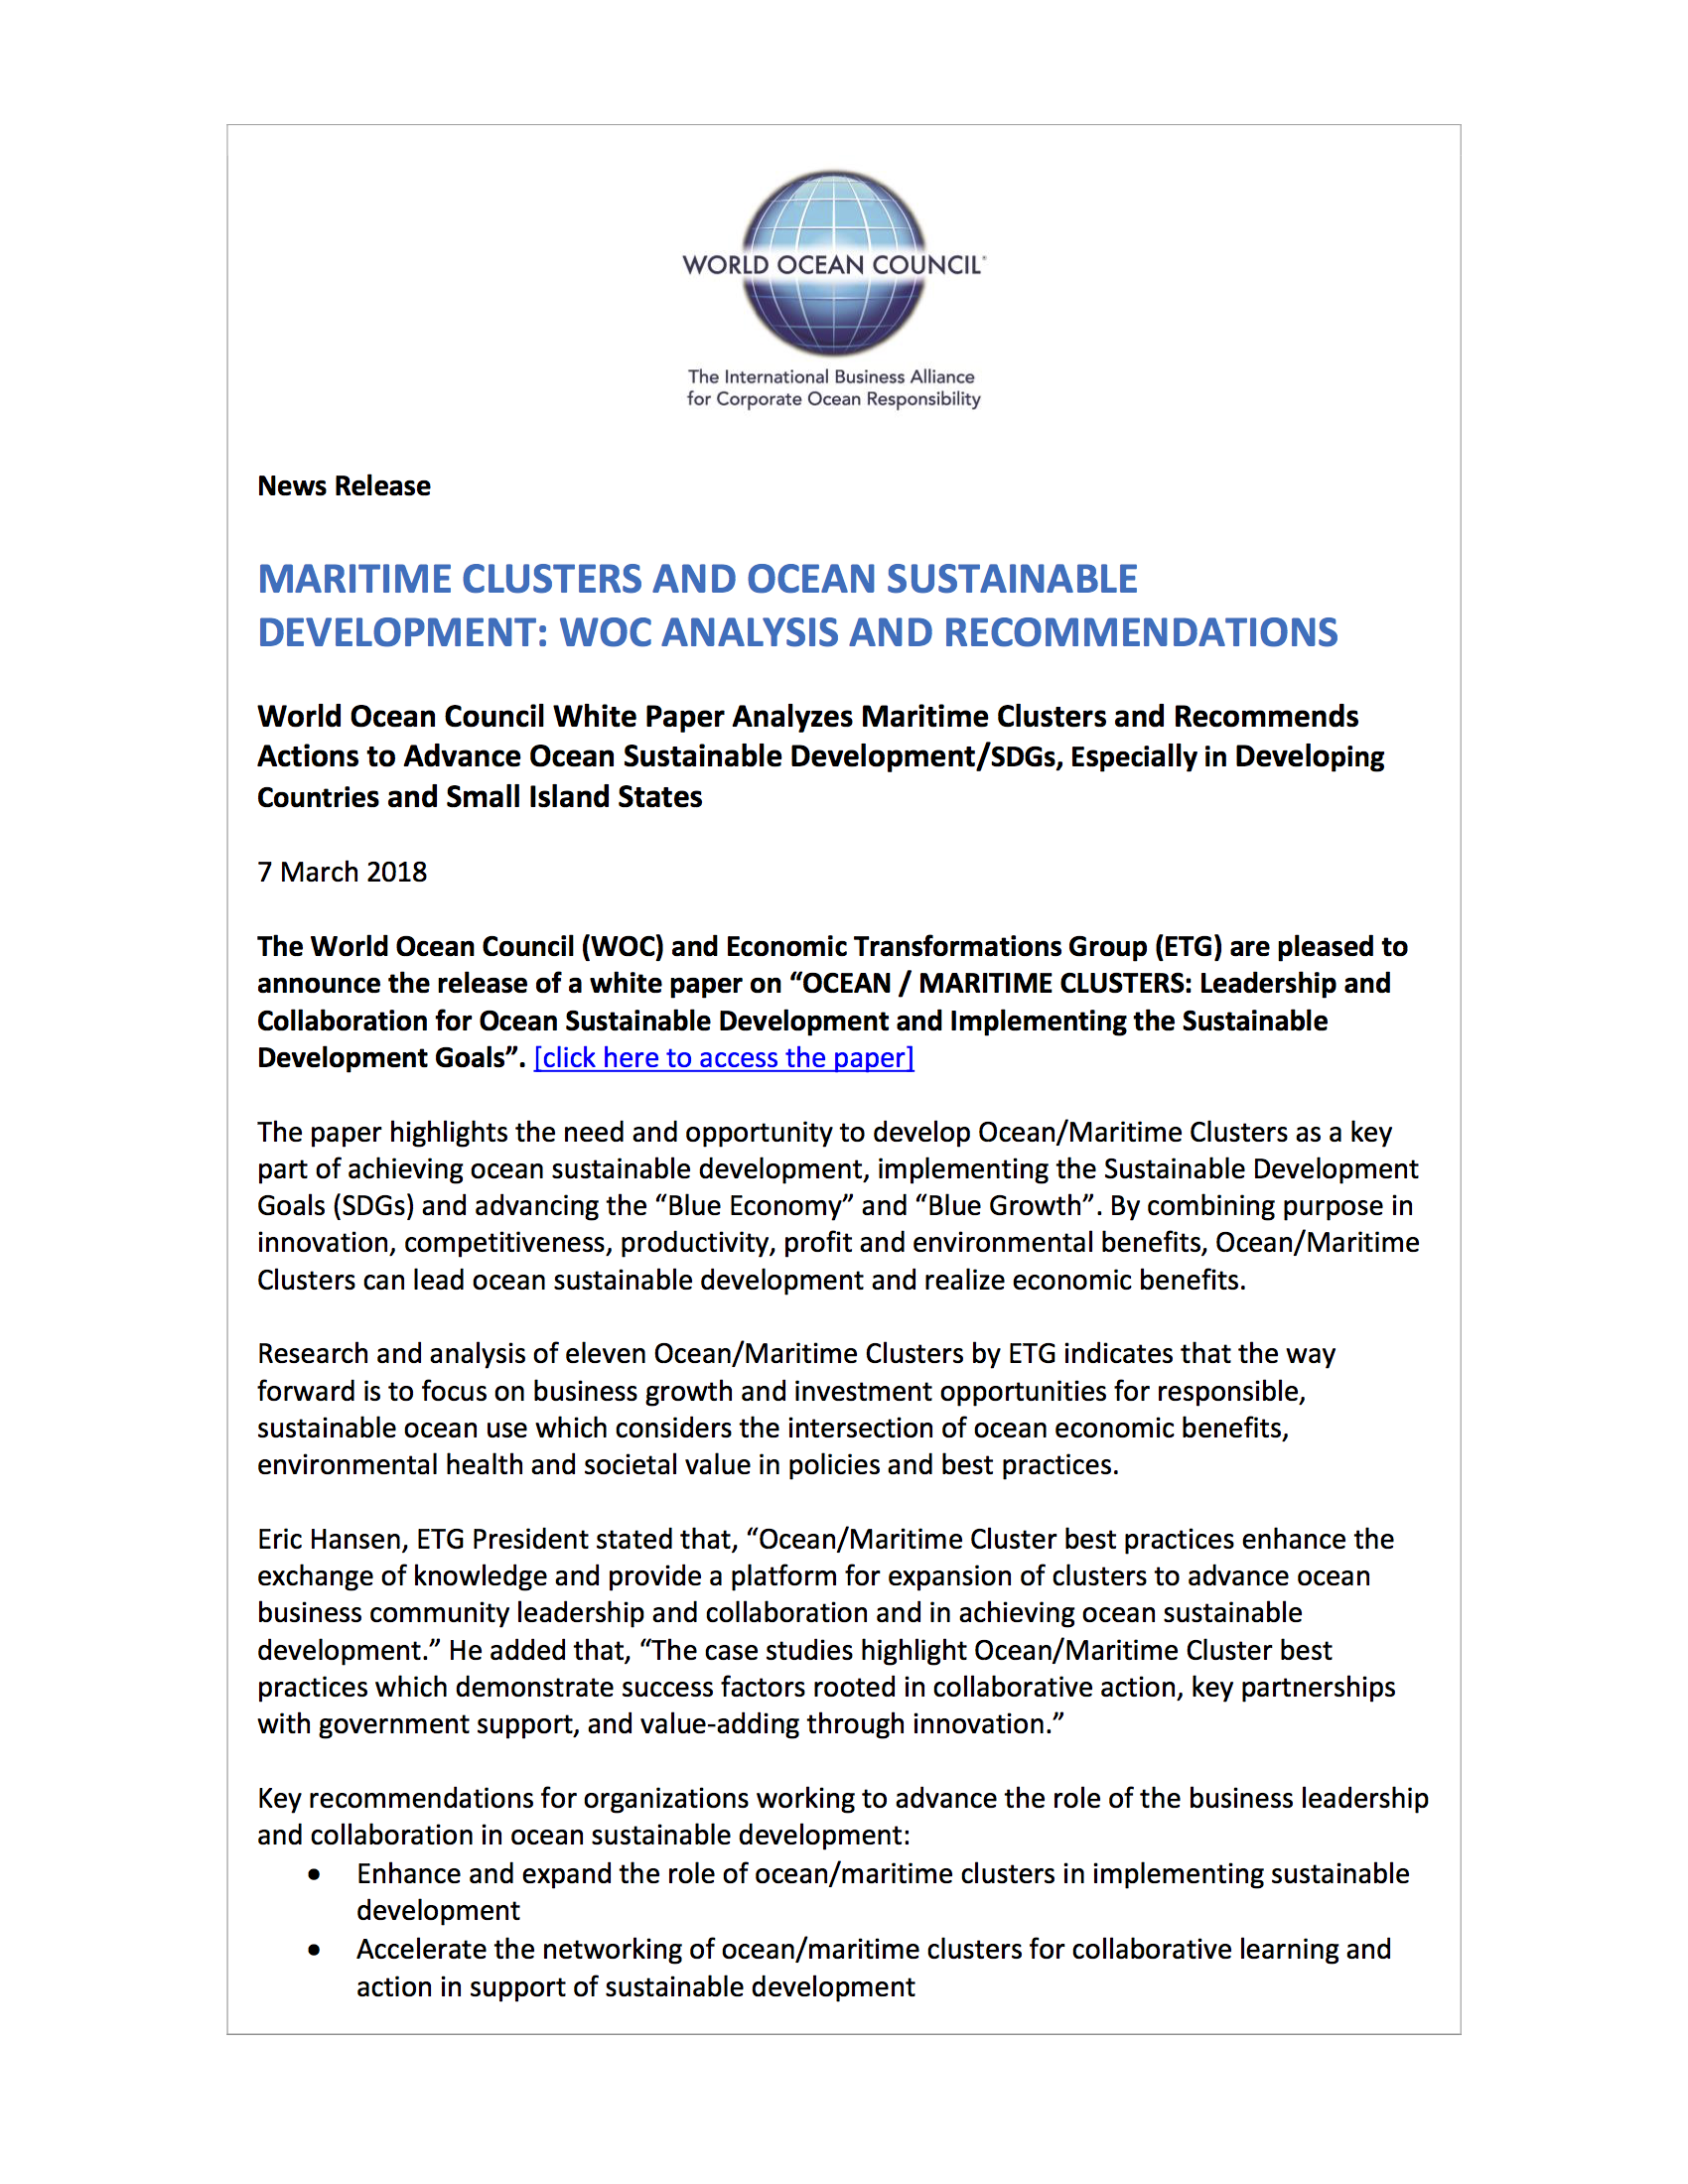 Maritime Clusters and Sustainable Development